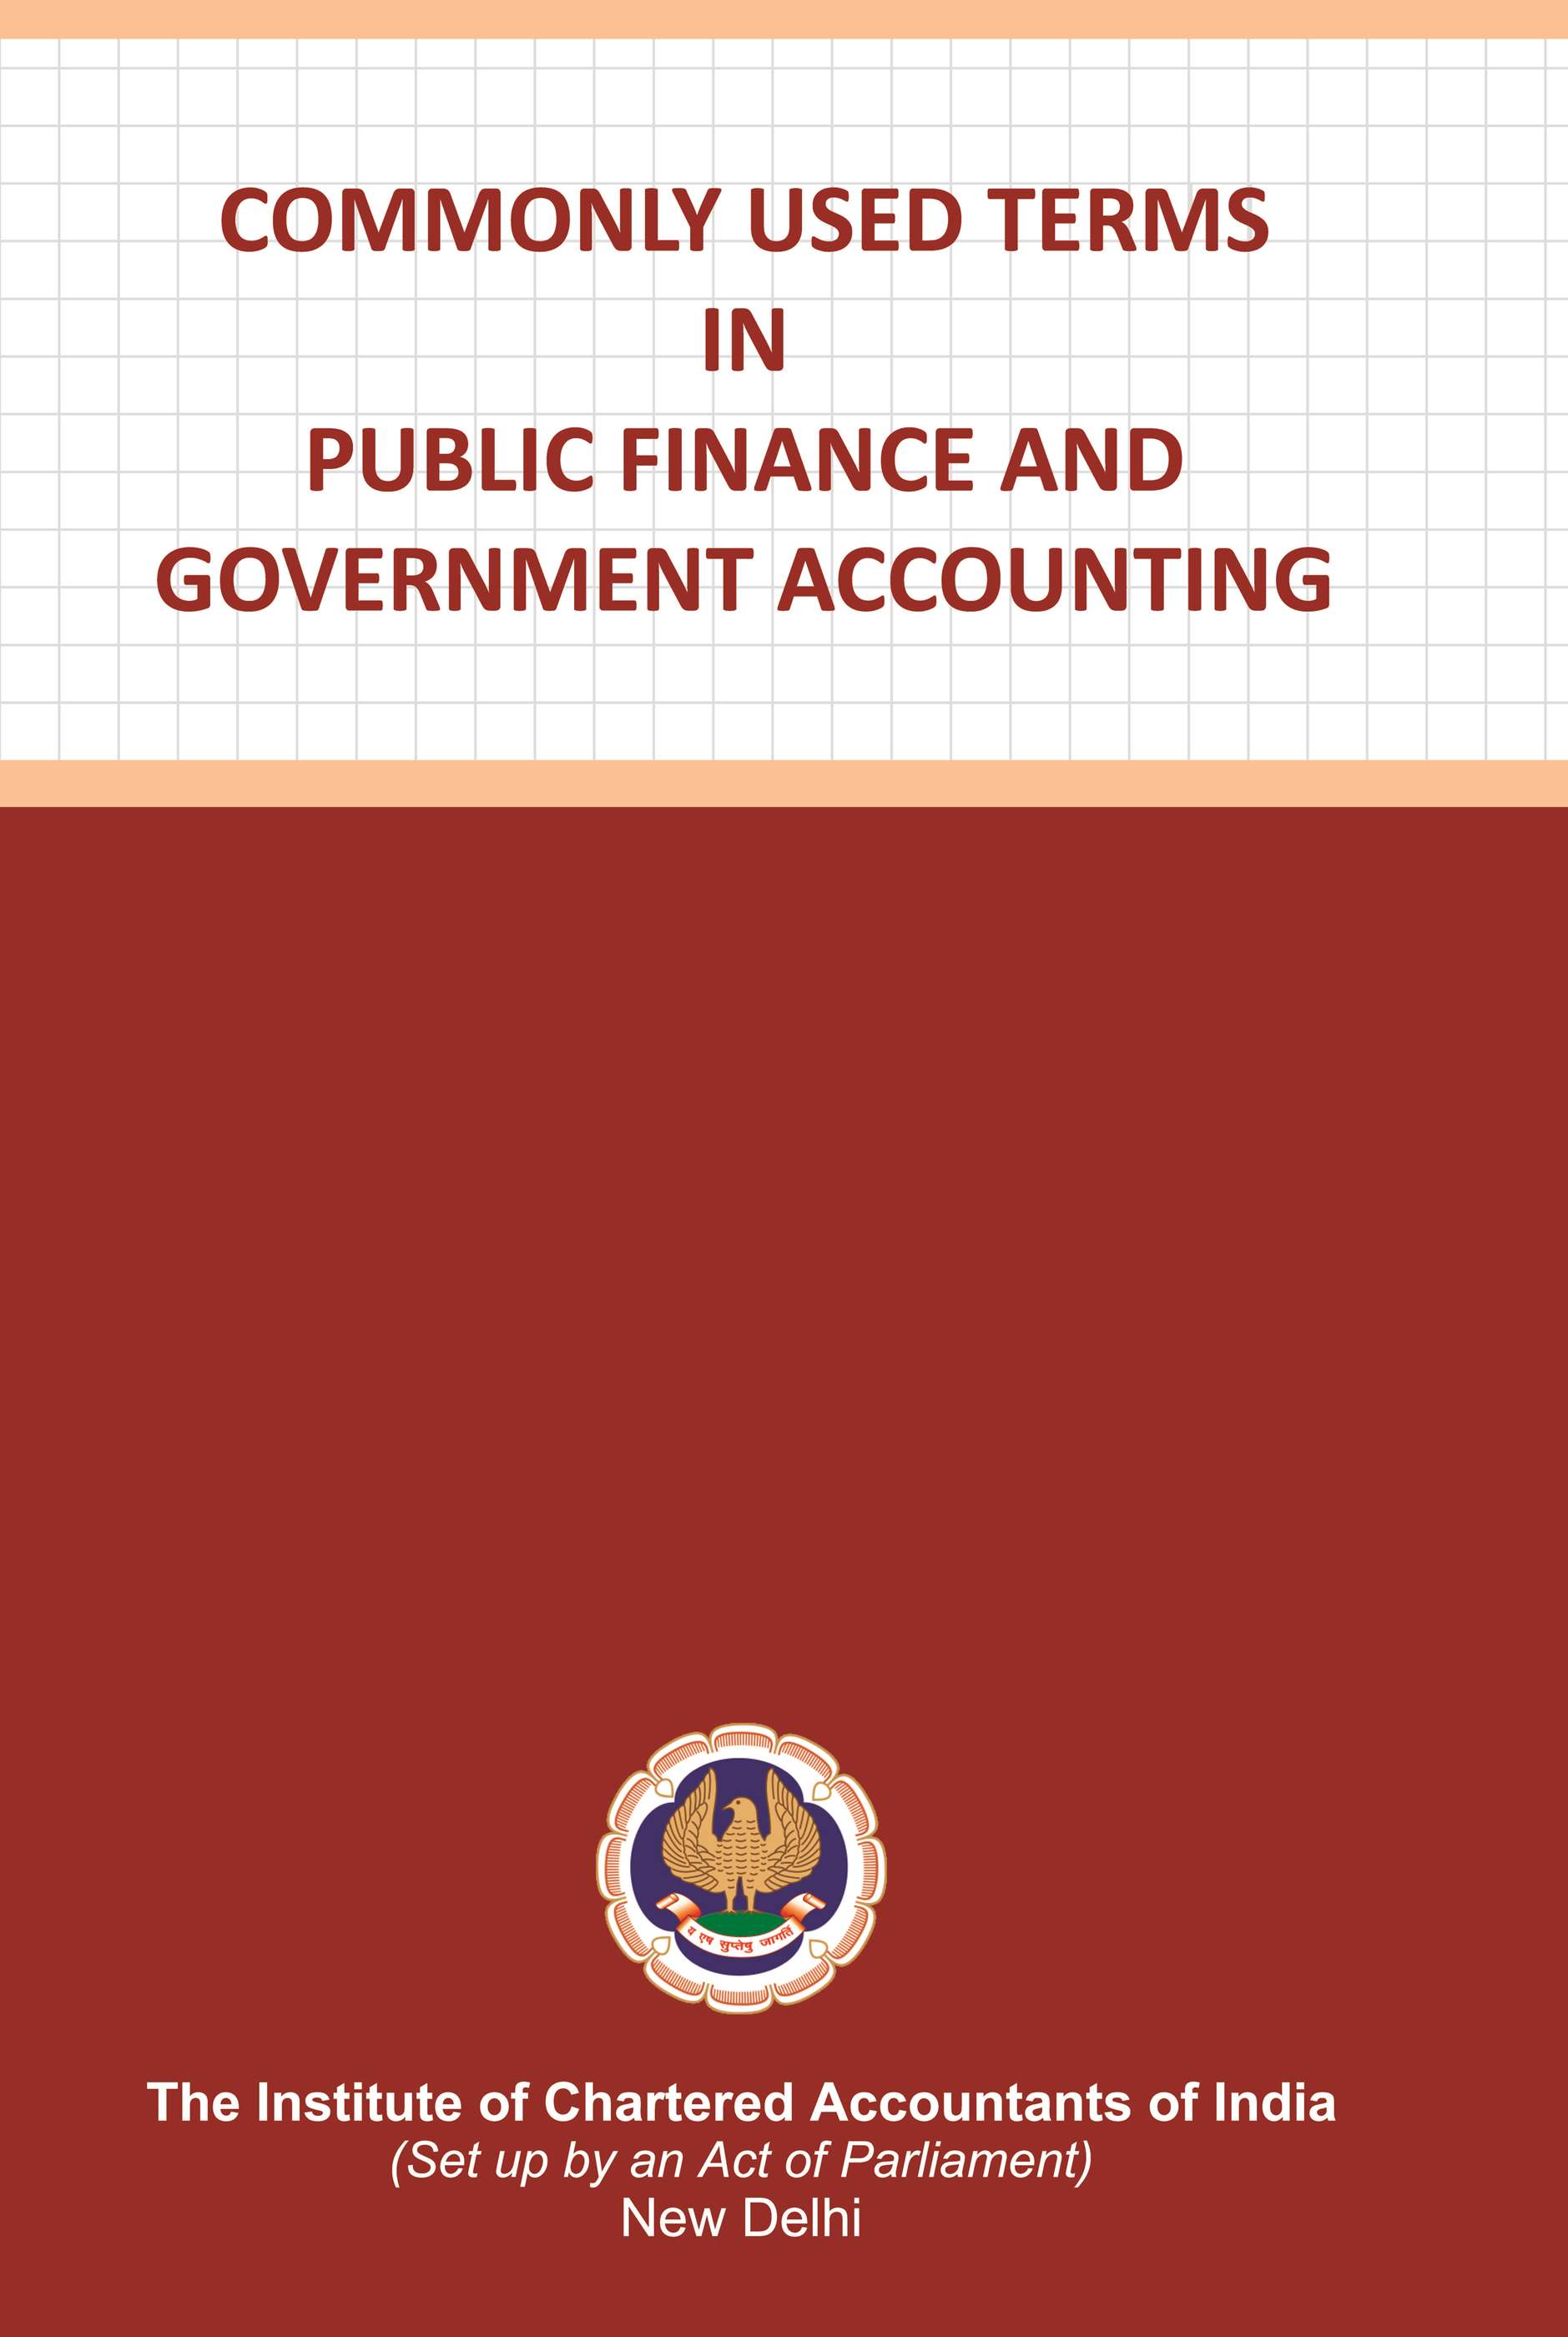 Commonly Used Terms in Public Finance and Government Accounting (Revised 2022)